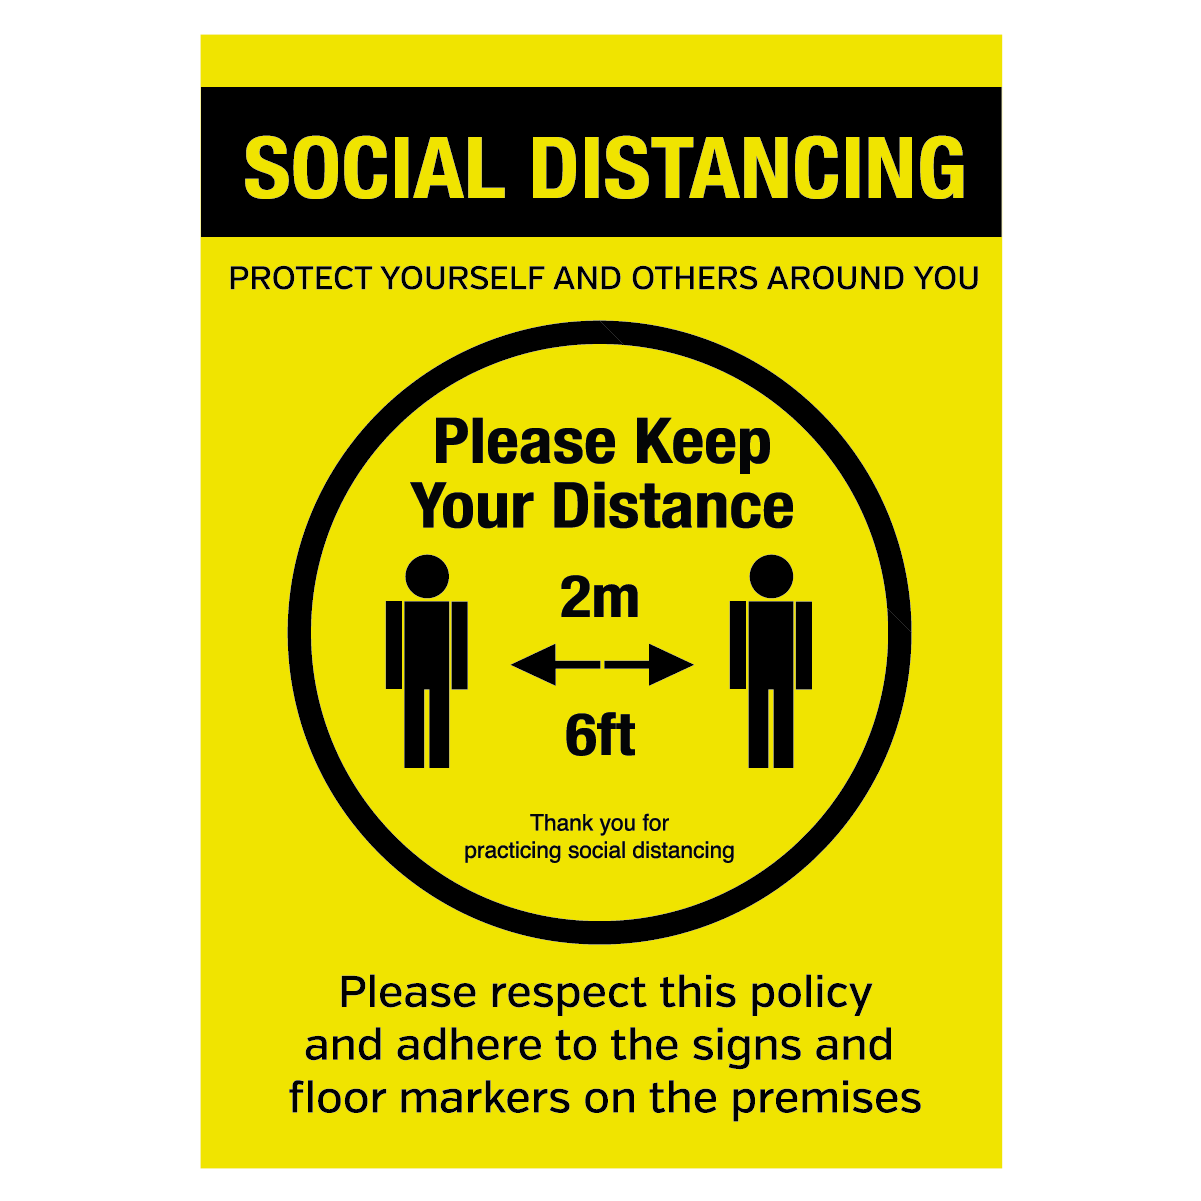 Please keep your distance social distancing policy sign